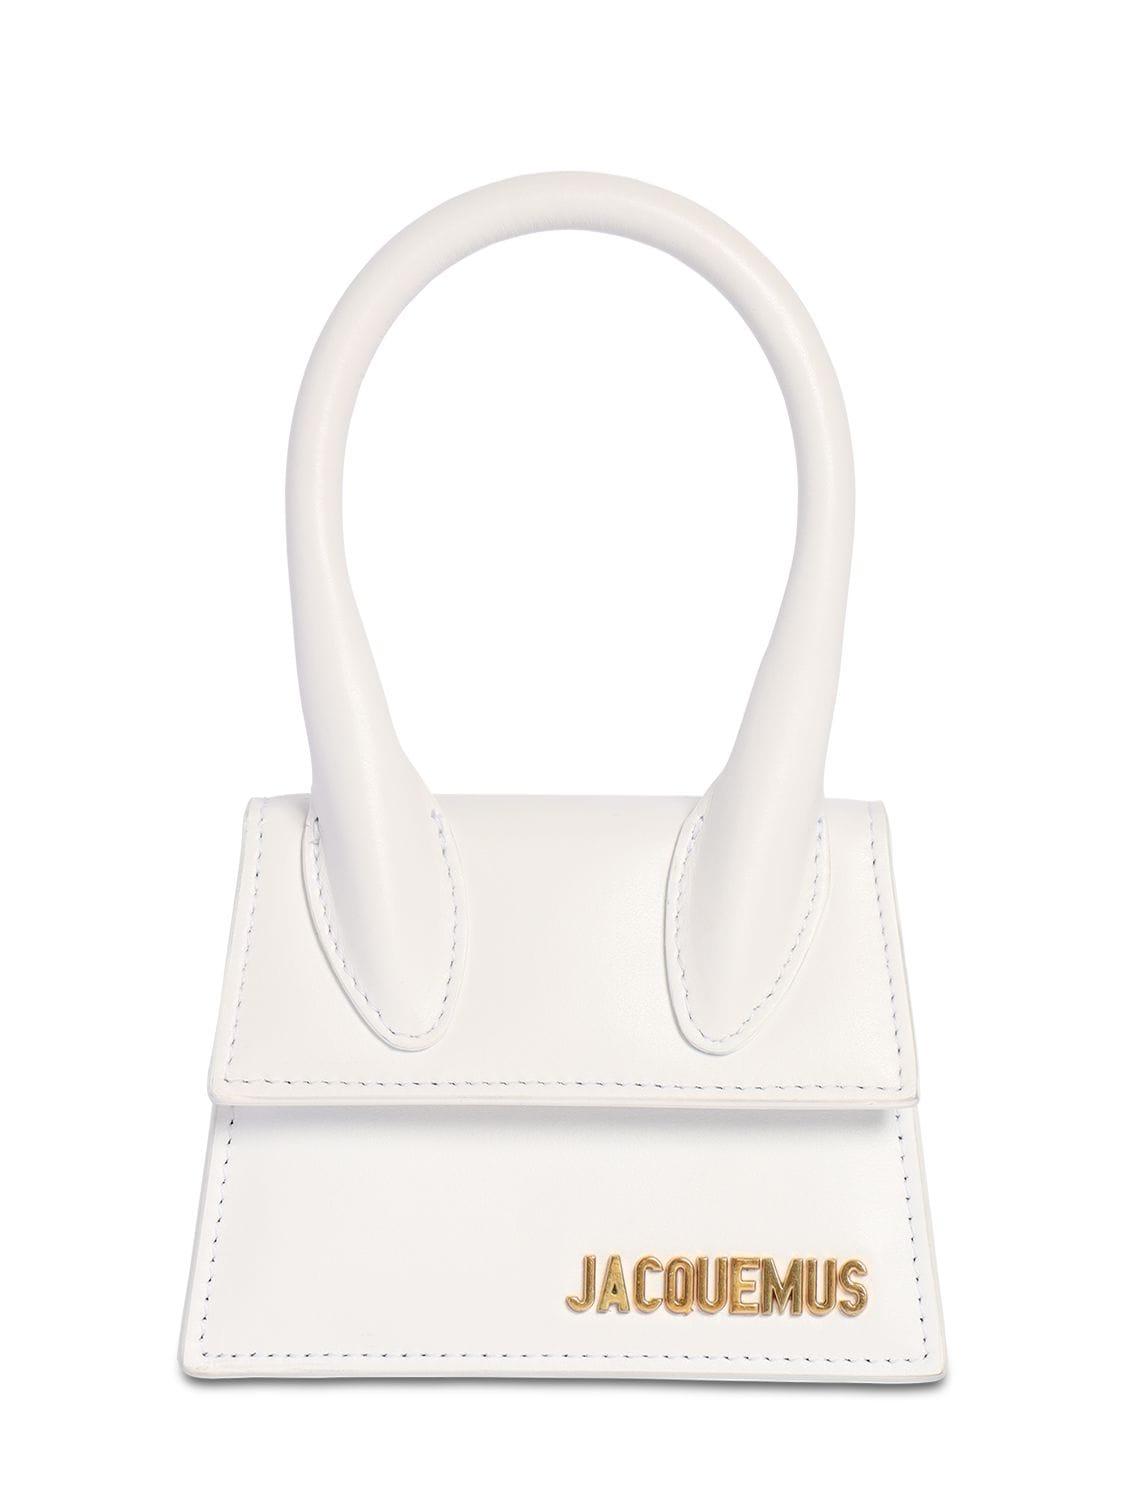 Jacquemus Le Chiquito Leather Bag in White - Lyst